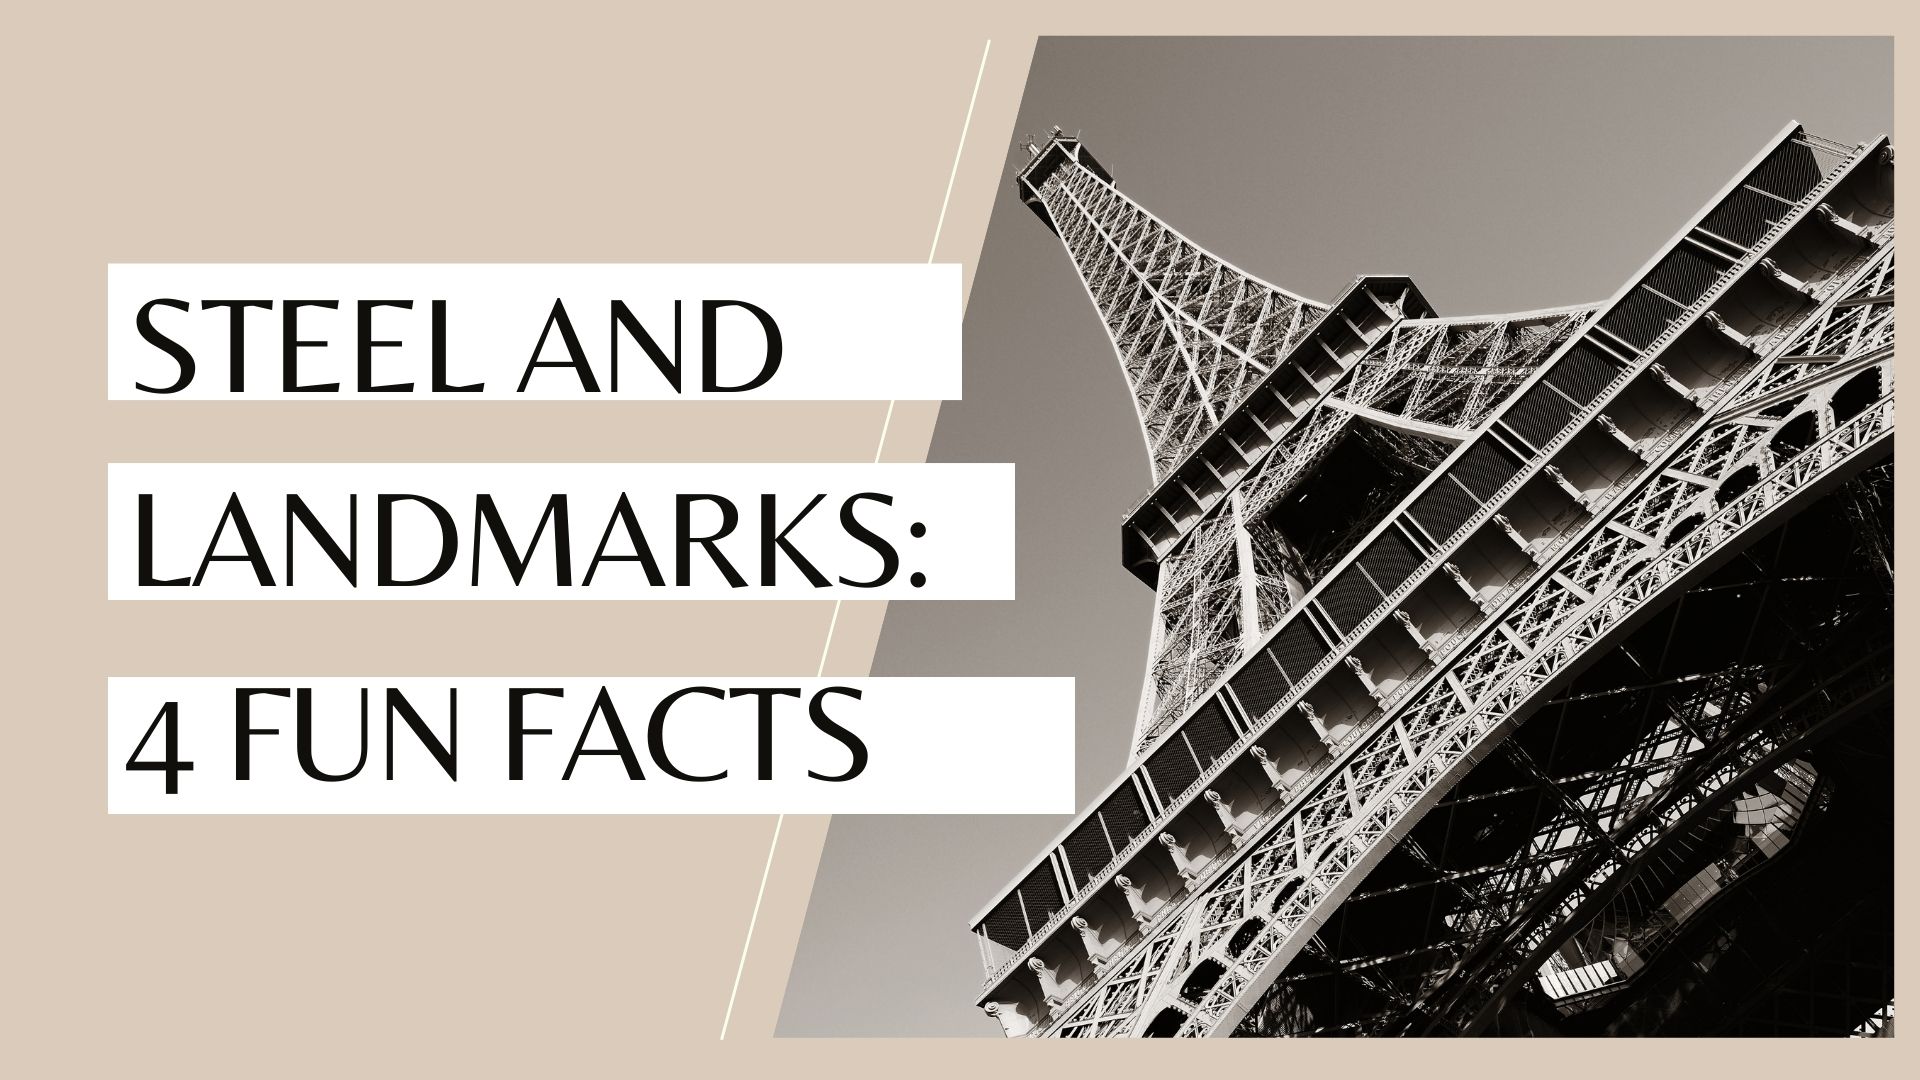 4 Fun Facts You Didn't Know About Steel in Landmark Buildings